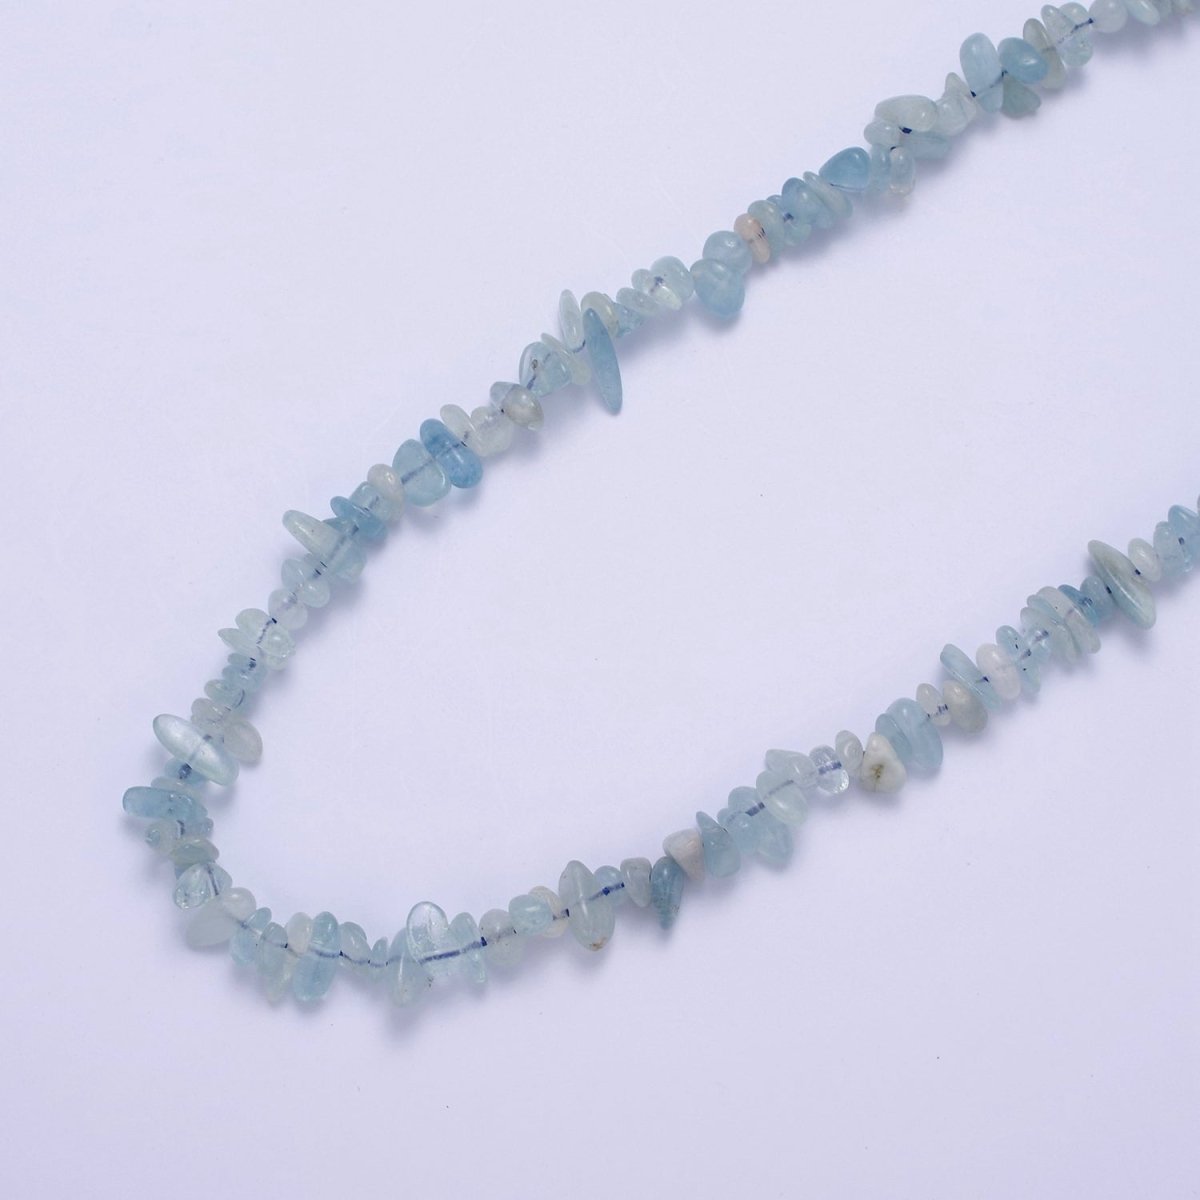 18.2 Inch Natural Blue Apatite Crystal Stone Bead Necklace with 2" Extender | WA-641 Clearance Pricing - DLUXCA